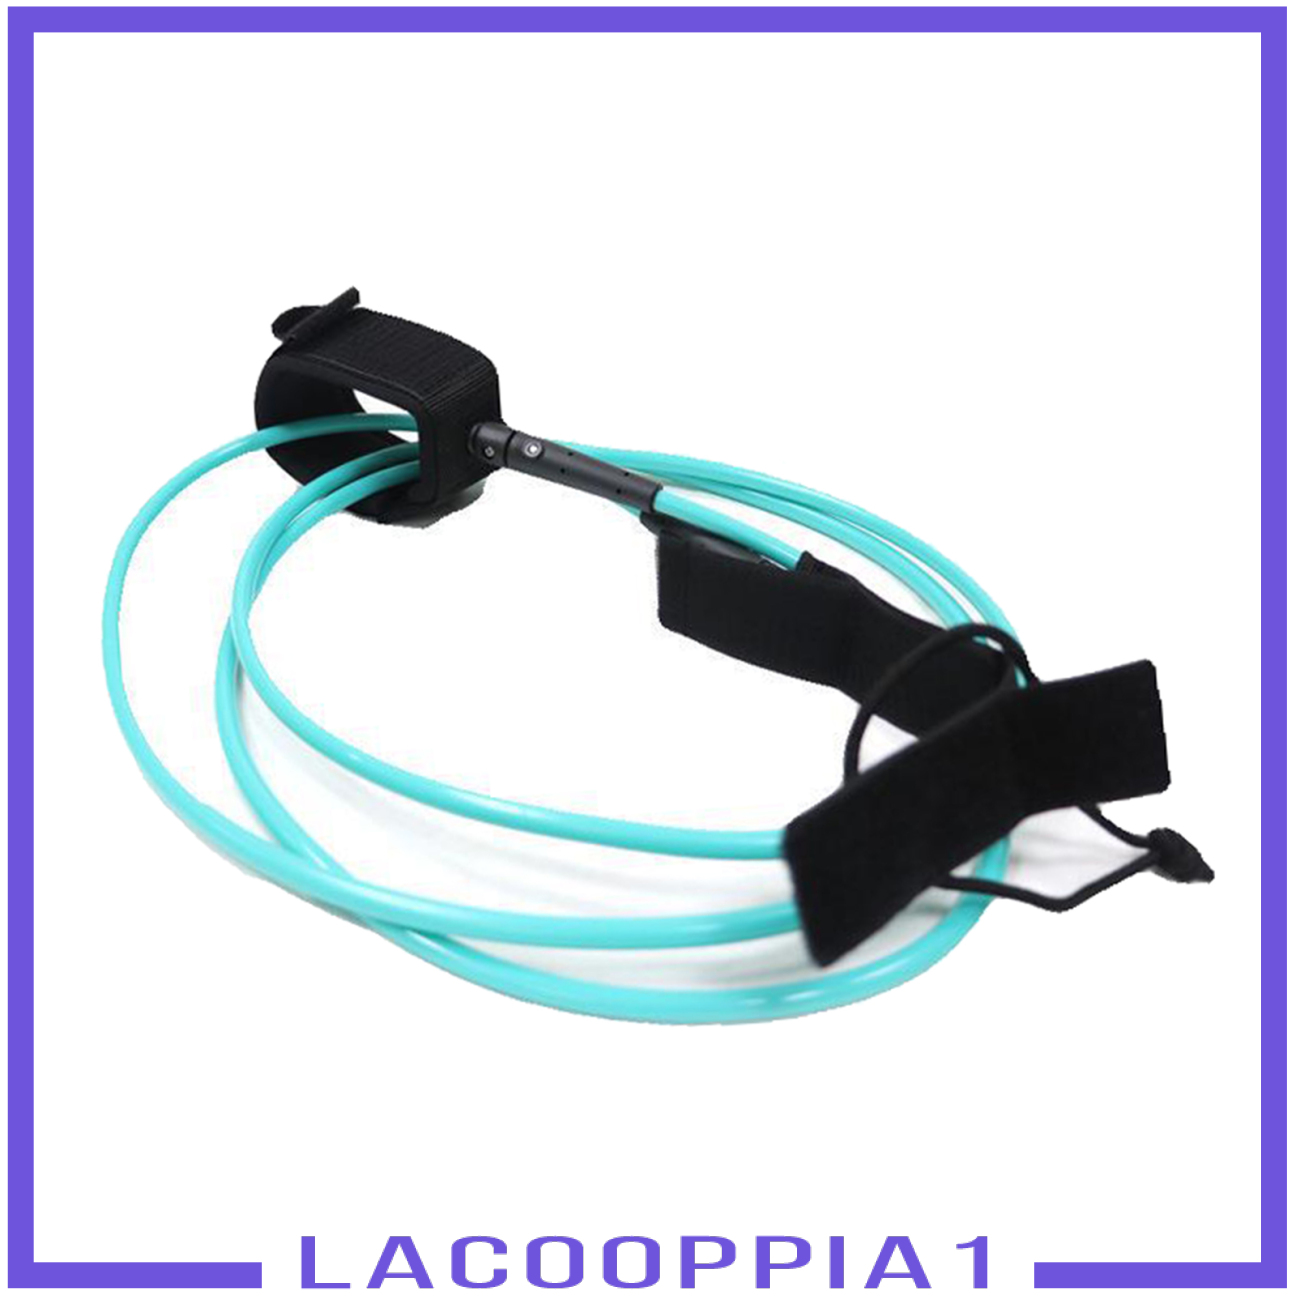 [LACOOPPIA1]10 Feet Surfing Ankle Leash Stand Up Board Leg Rope Leg Wrists Tether Cord